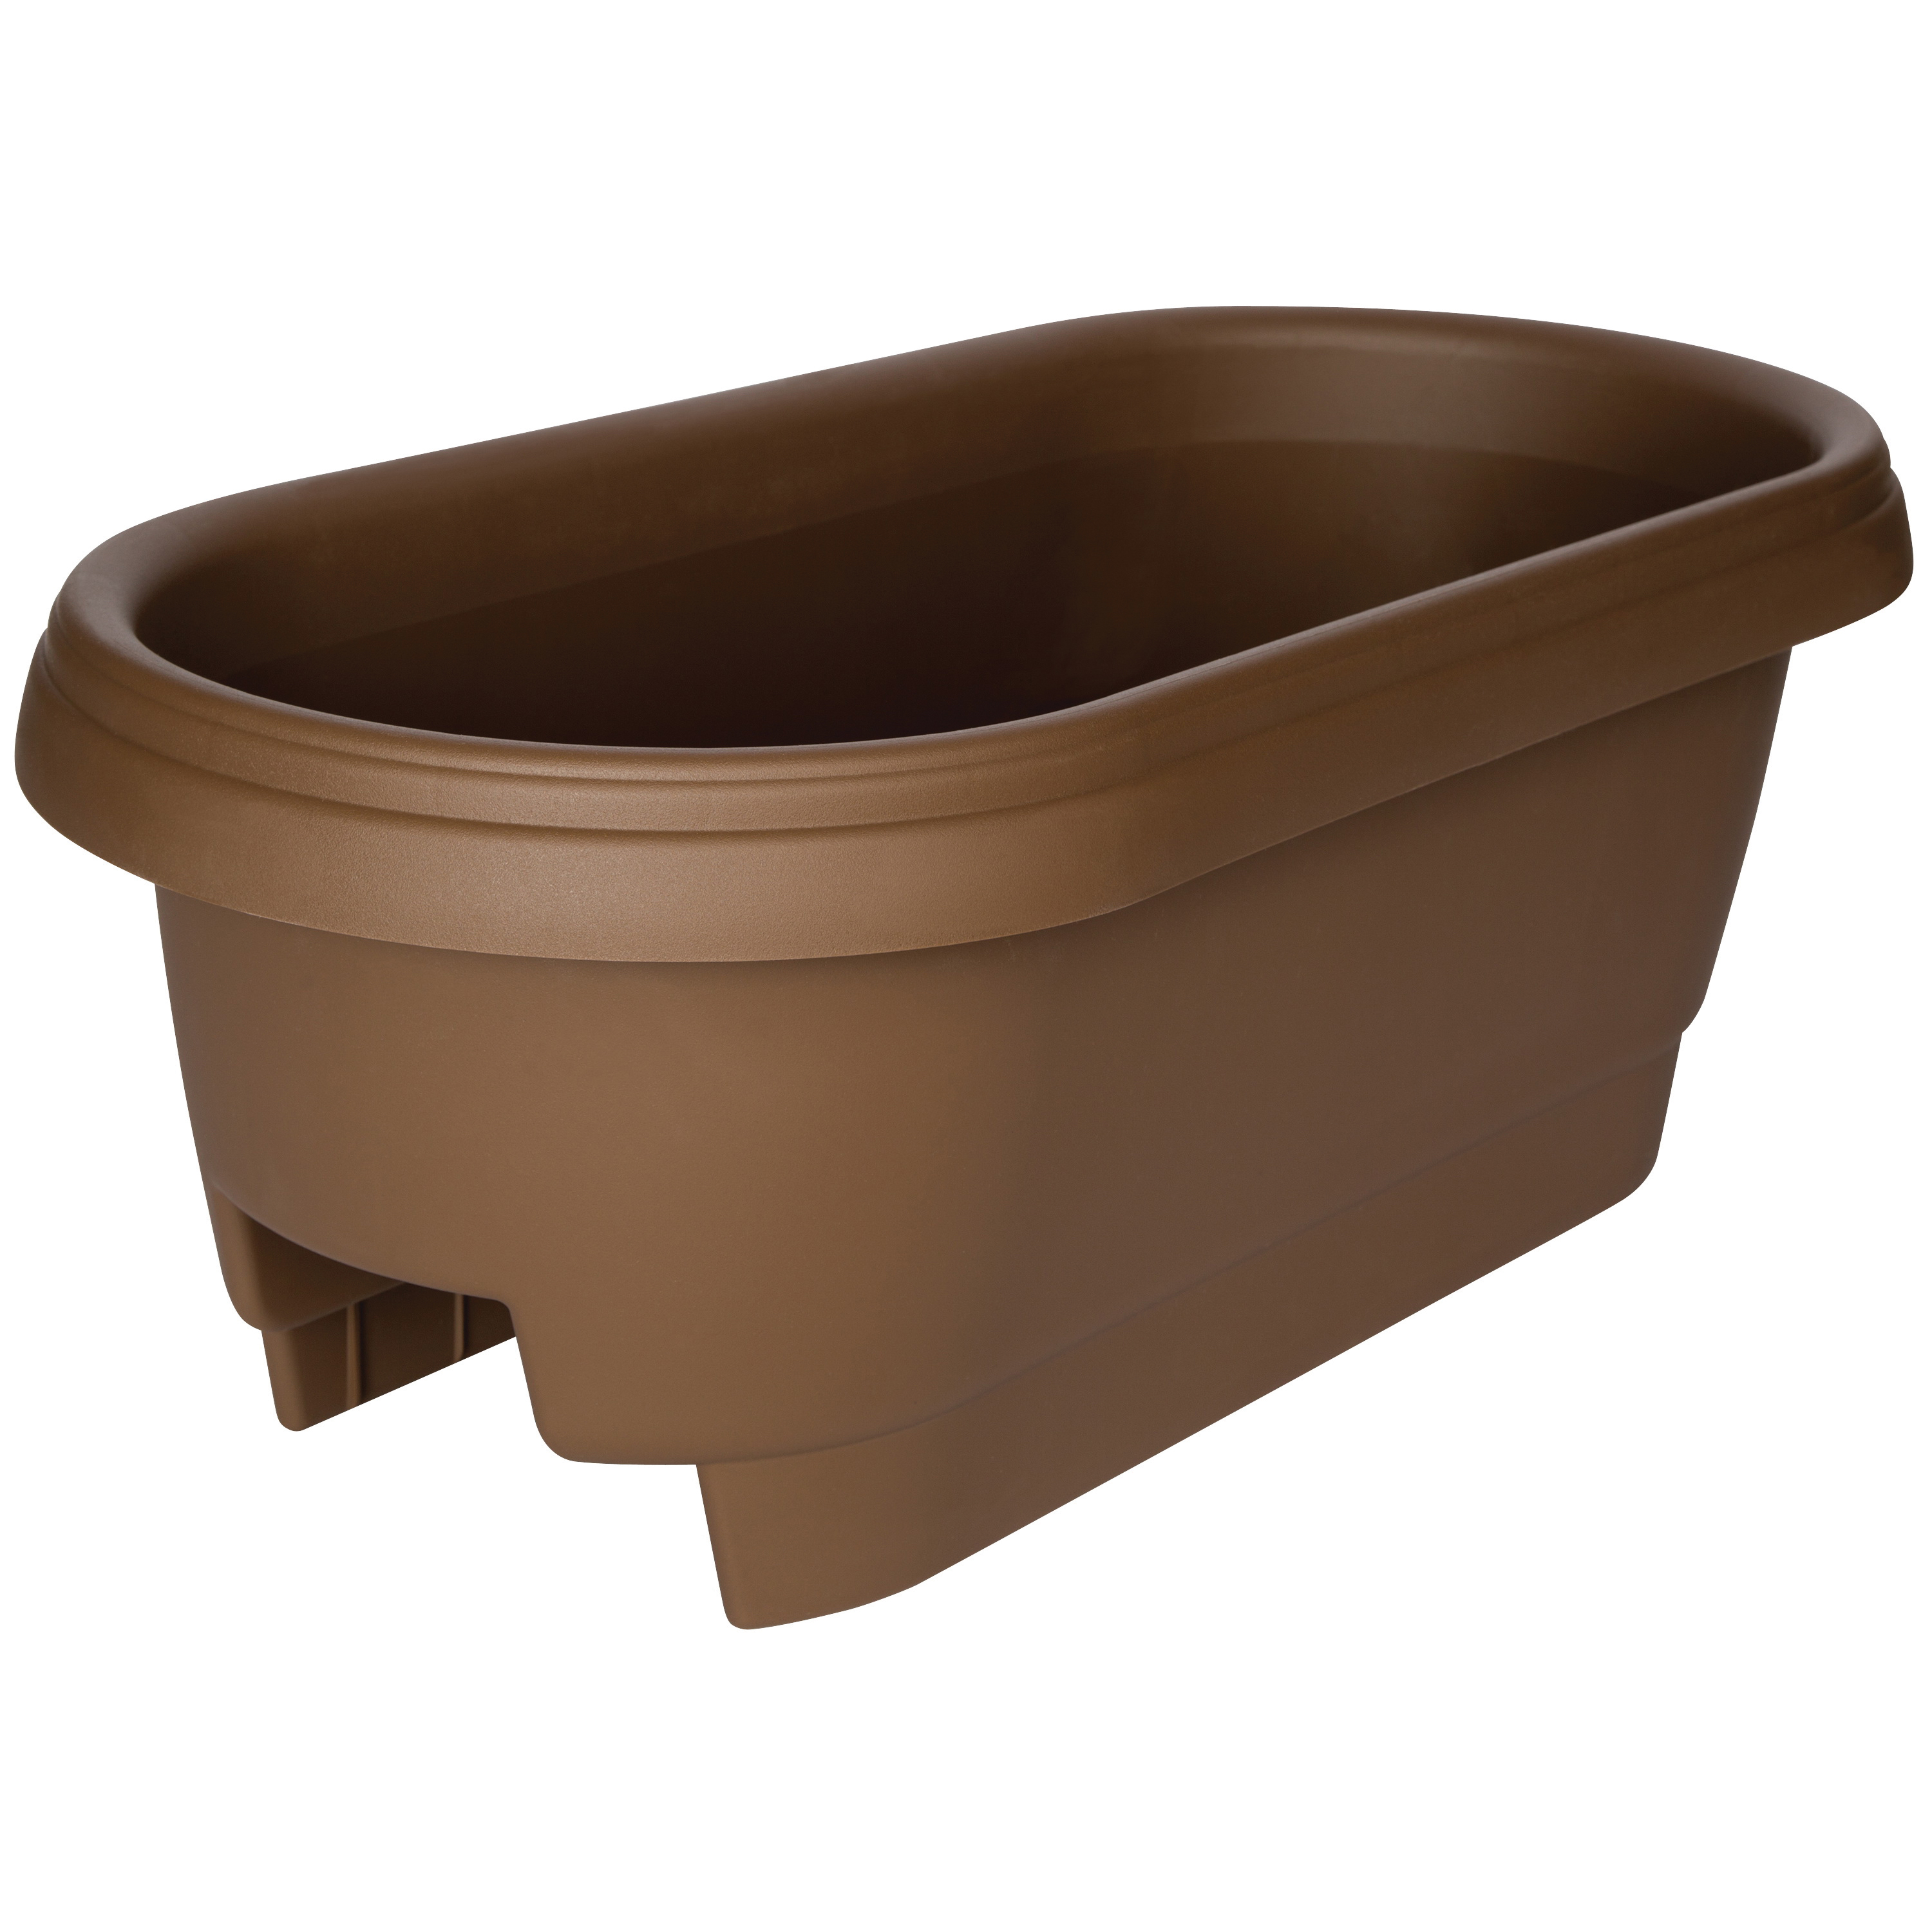 477245-1001 Planter, 9 in H, 11.9 in W, 23.9 in D, Plastic, Chocolate, Matte